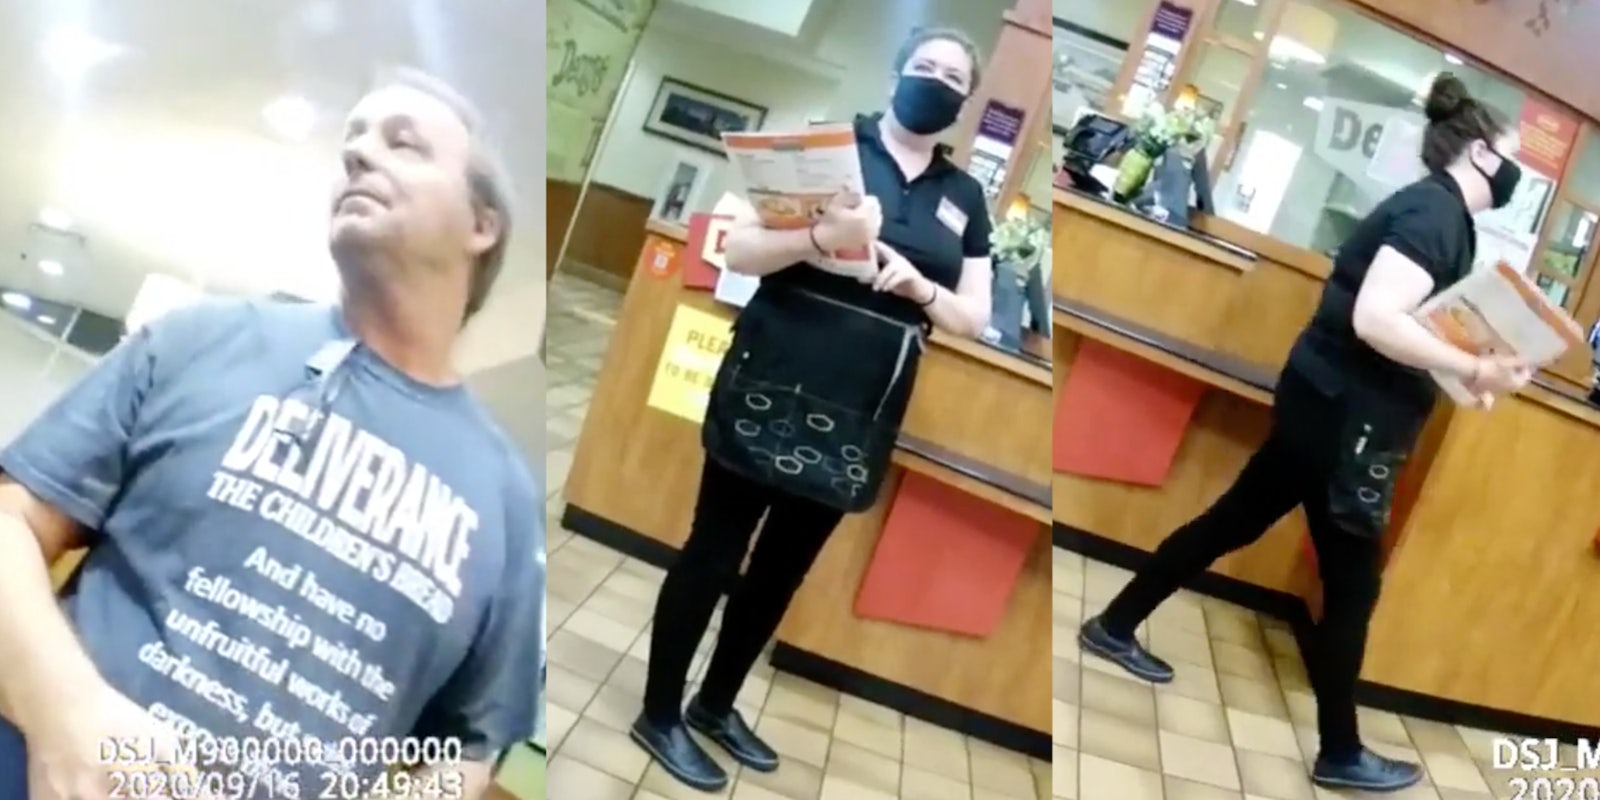 dennys worker quits anti-maskers